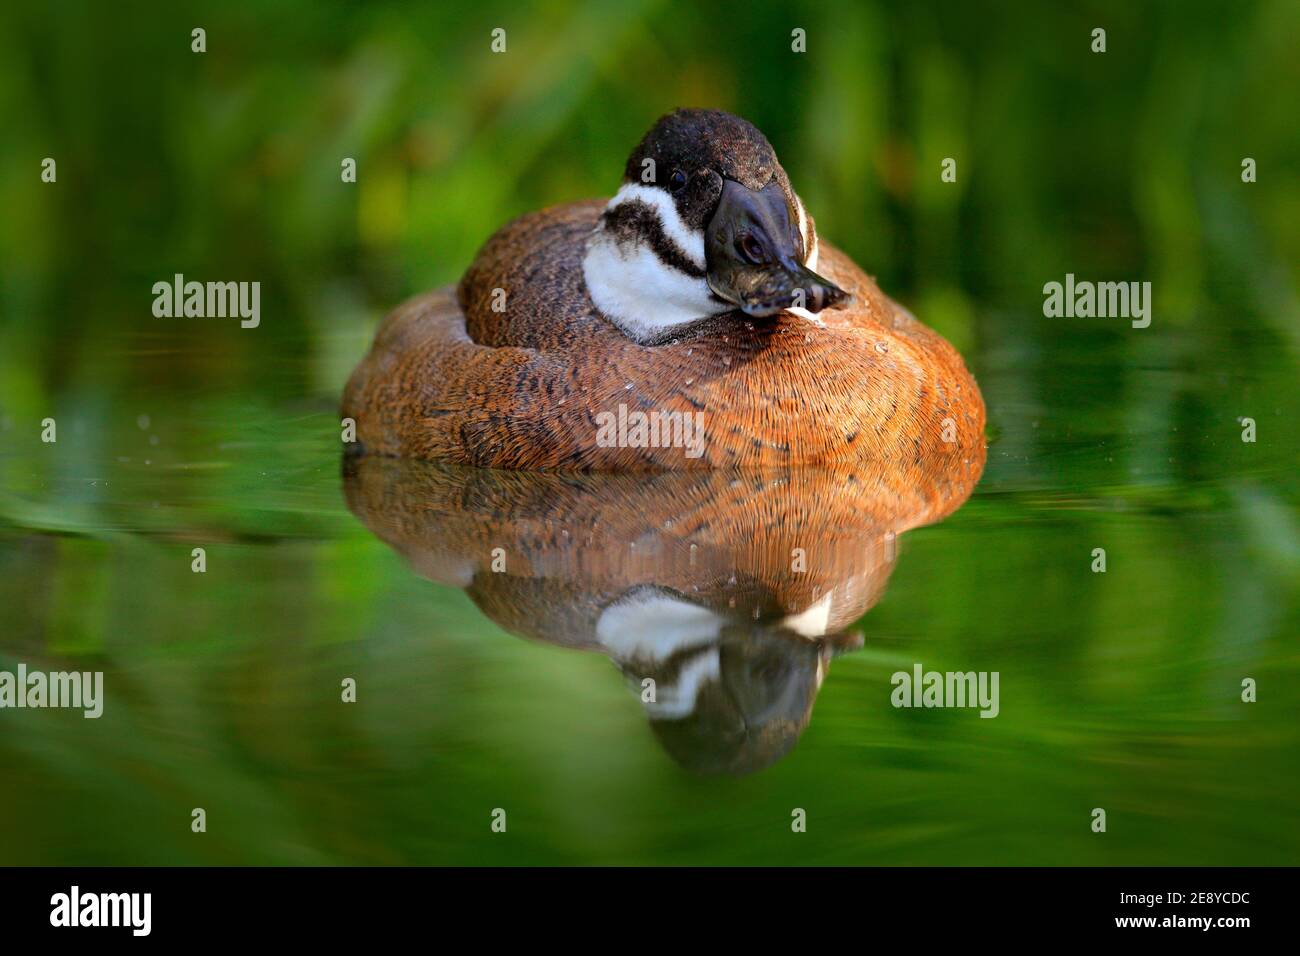 Ruddy Duck, Oxyura jamaicensis, female with beautiful green coloured water surface. Male of brown duck with blue bill. Wildlife scene from nature, Mex Stock Photo